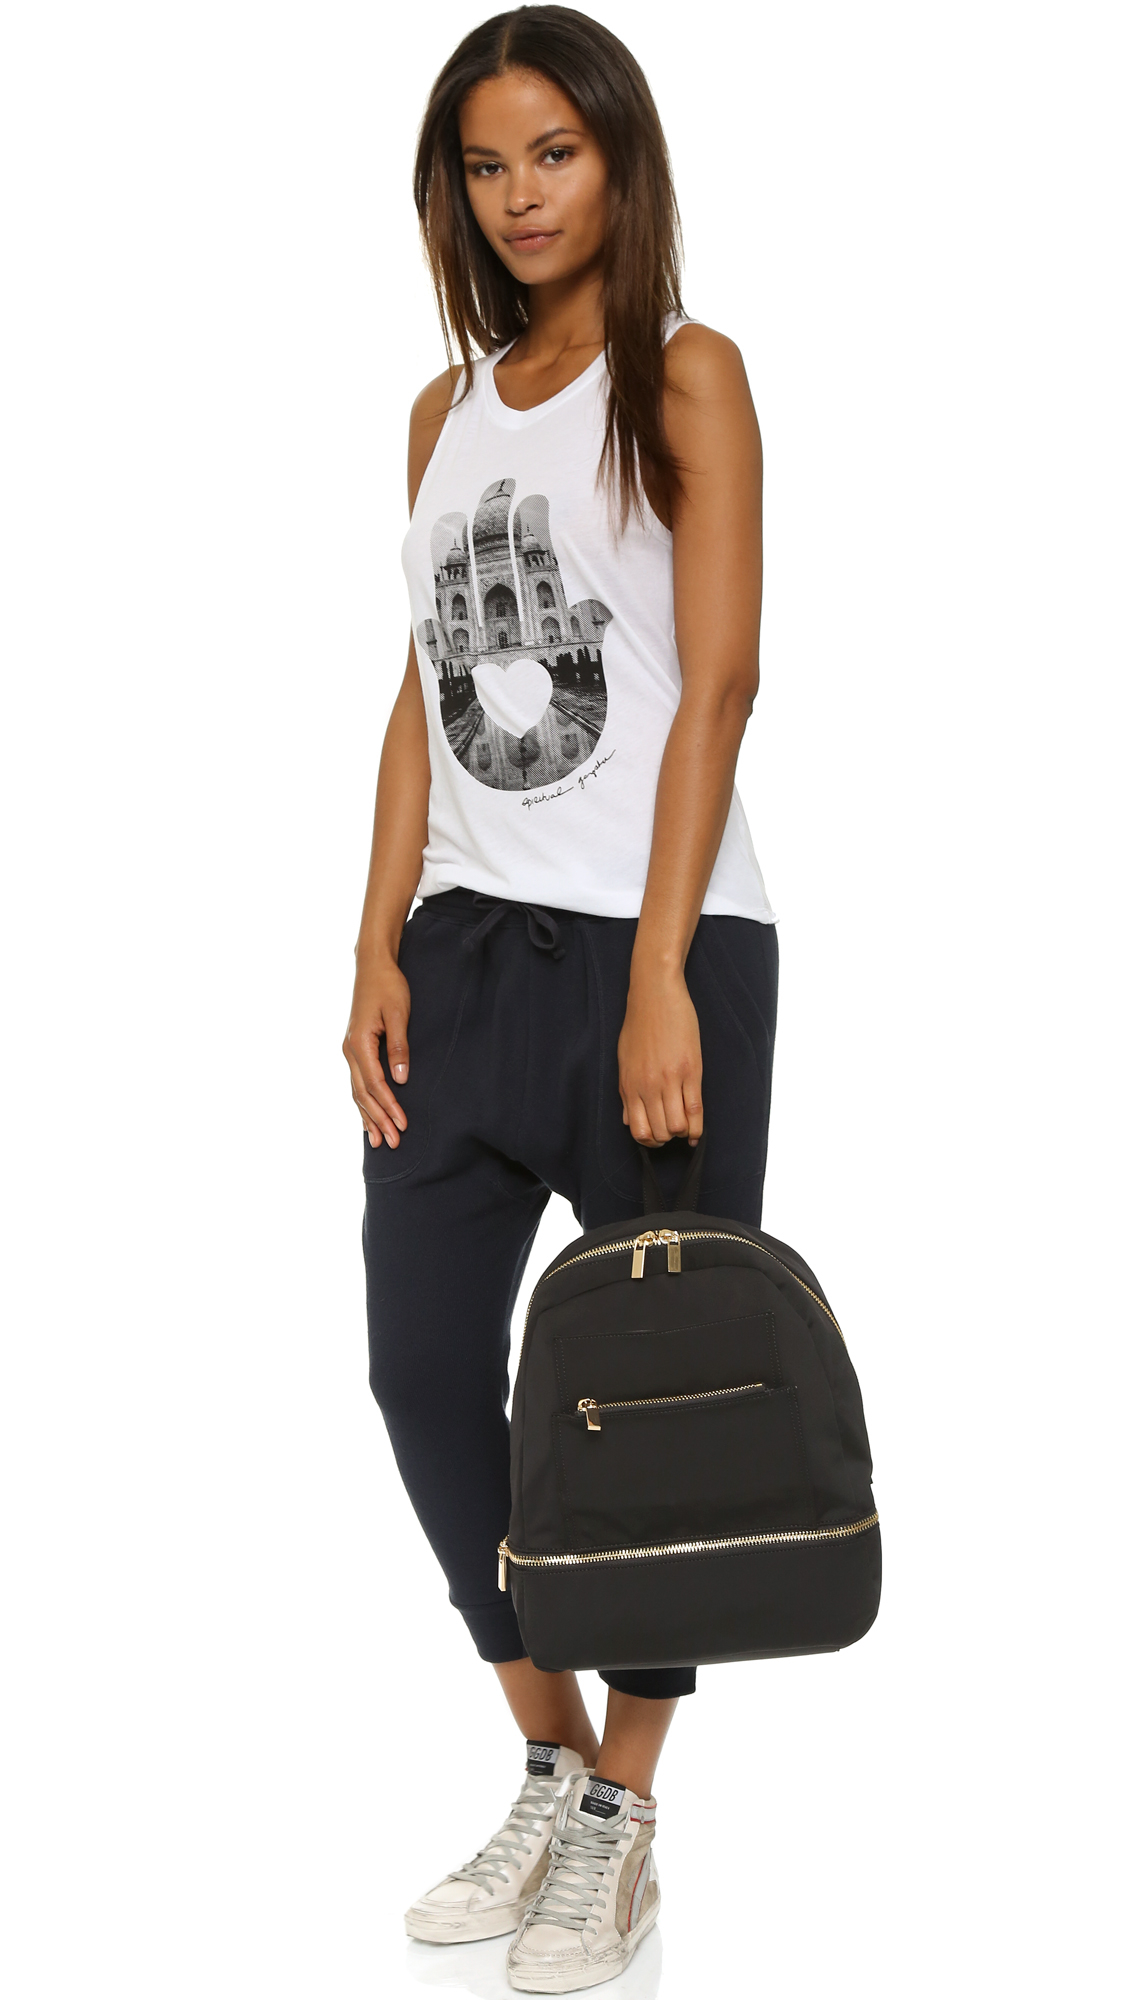 DEUX LUX Luxurious Looking Backpacks - from $45 - 2locos